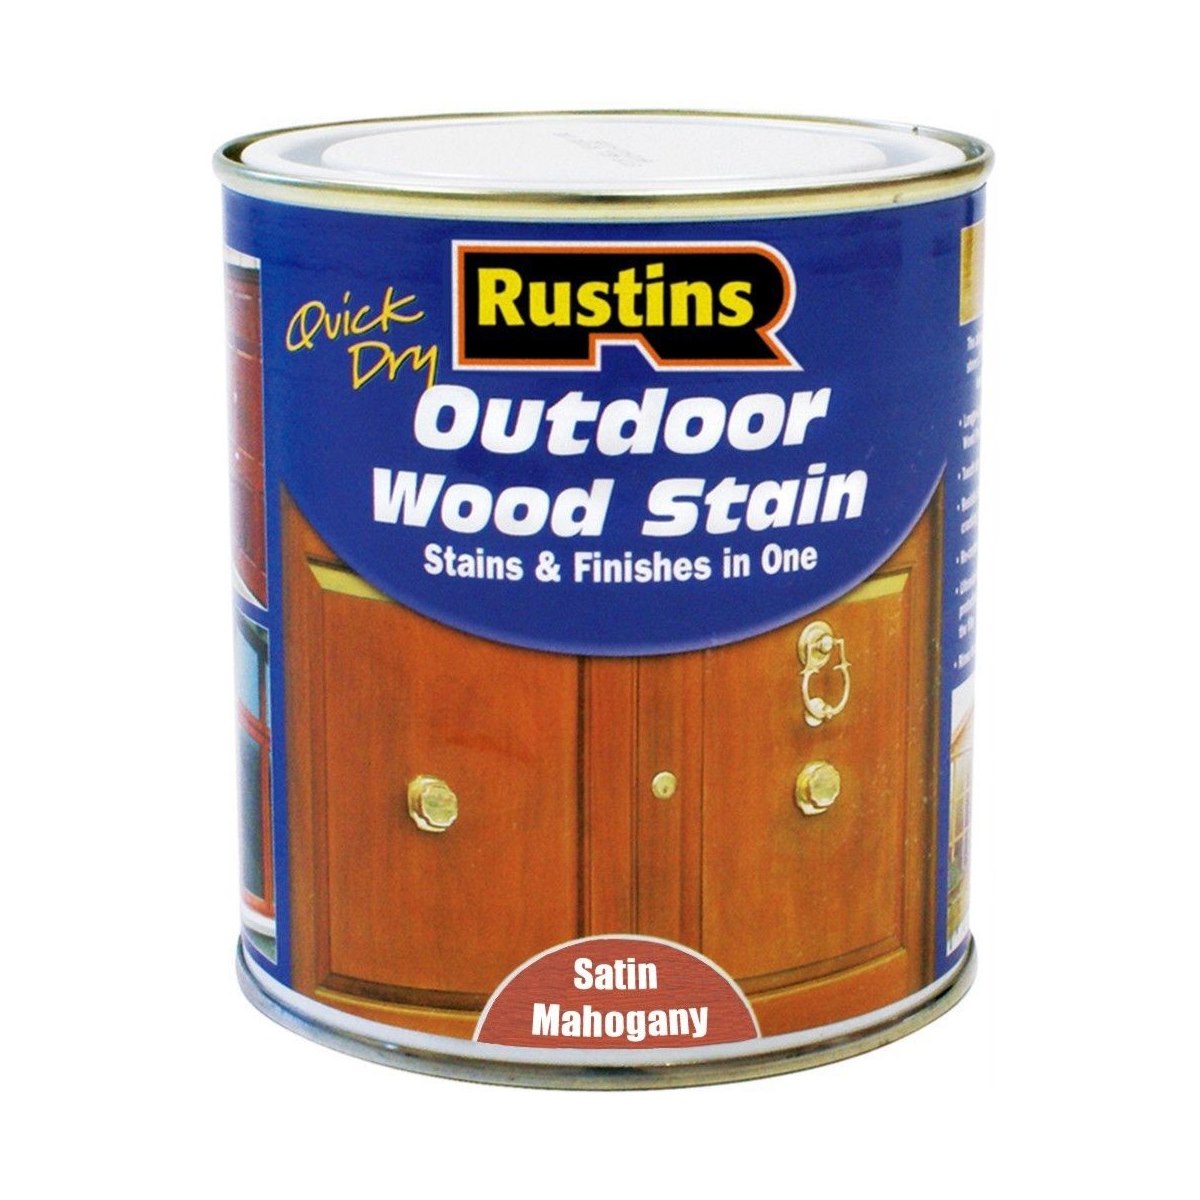 Rustins Quick Dry Outdoor Wood Stain Mahogany 250ml